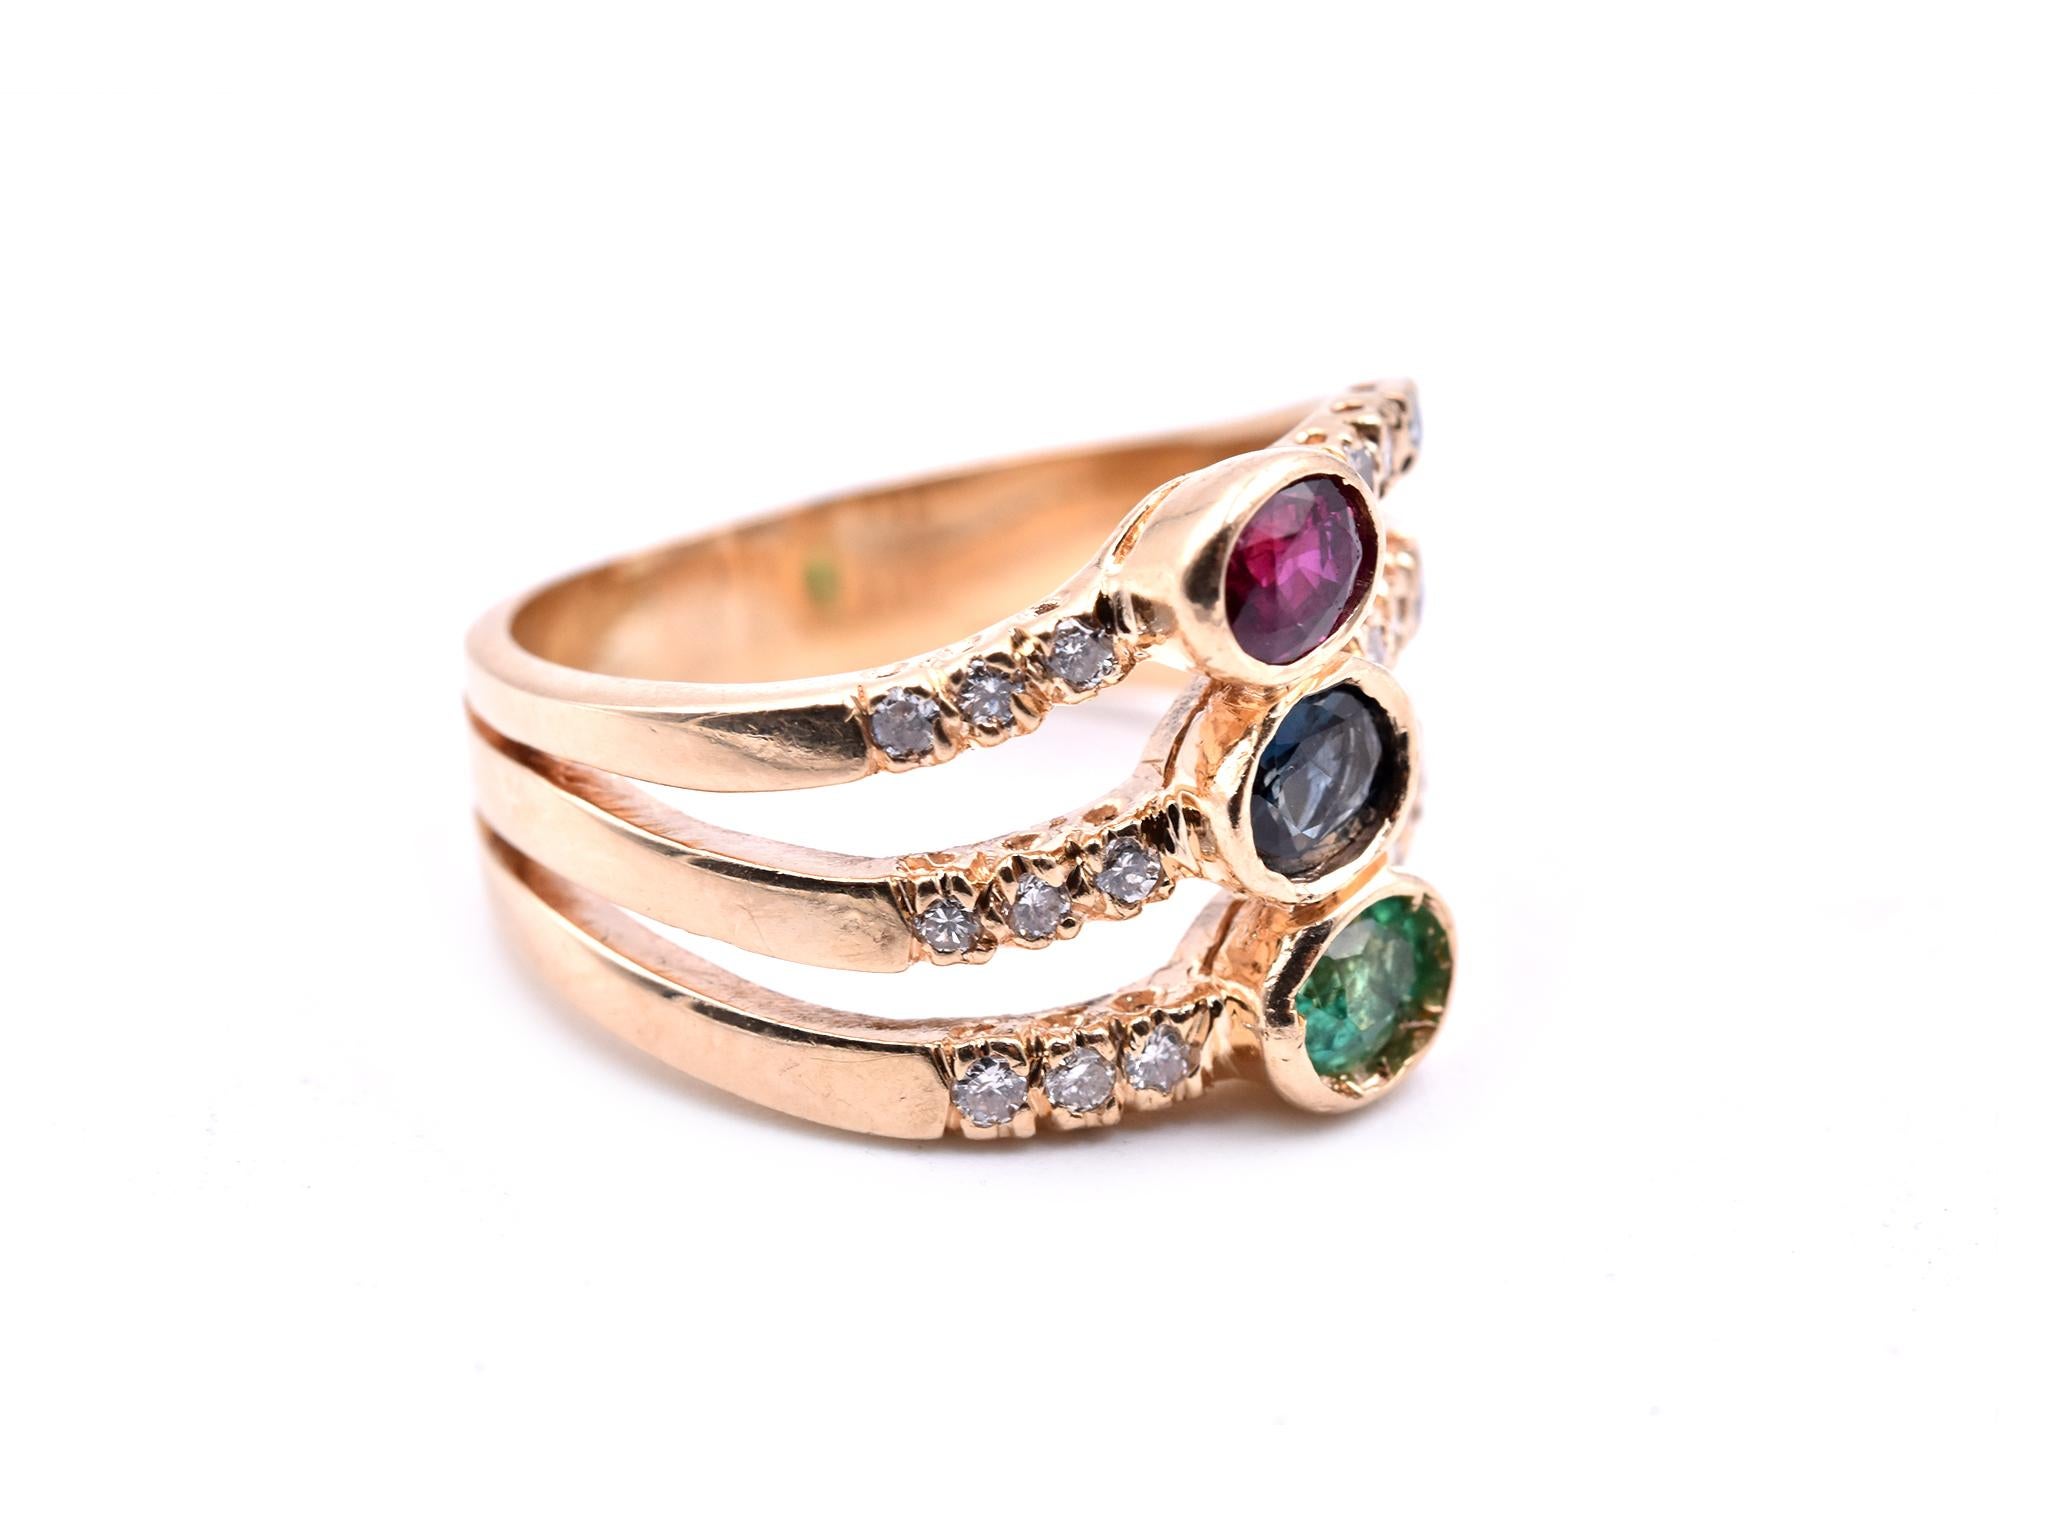 Designer: custom design
Material: 14k yellow gold
Ruby: oval cut = .25cttw
Sapphire: oval cut = .25ttw
Emerald: oval cut= .25cttw
Diamonds: 18 round brilliant cut = .30cttw
Color: G
Clarity: VS
Ring size: 6 (please allow two additional shipping days